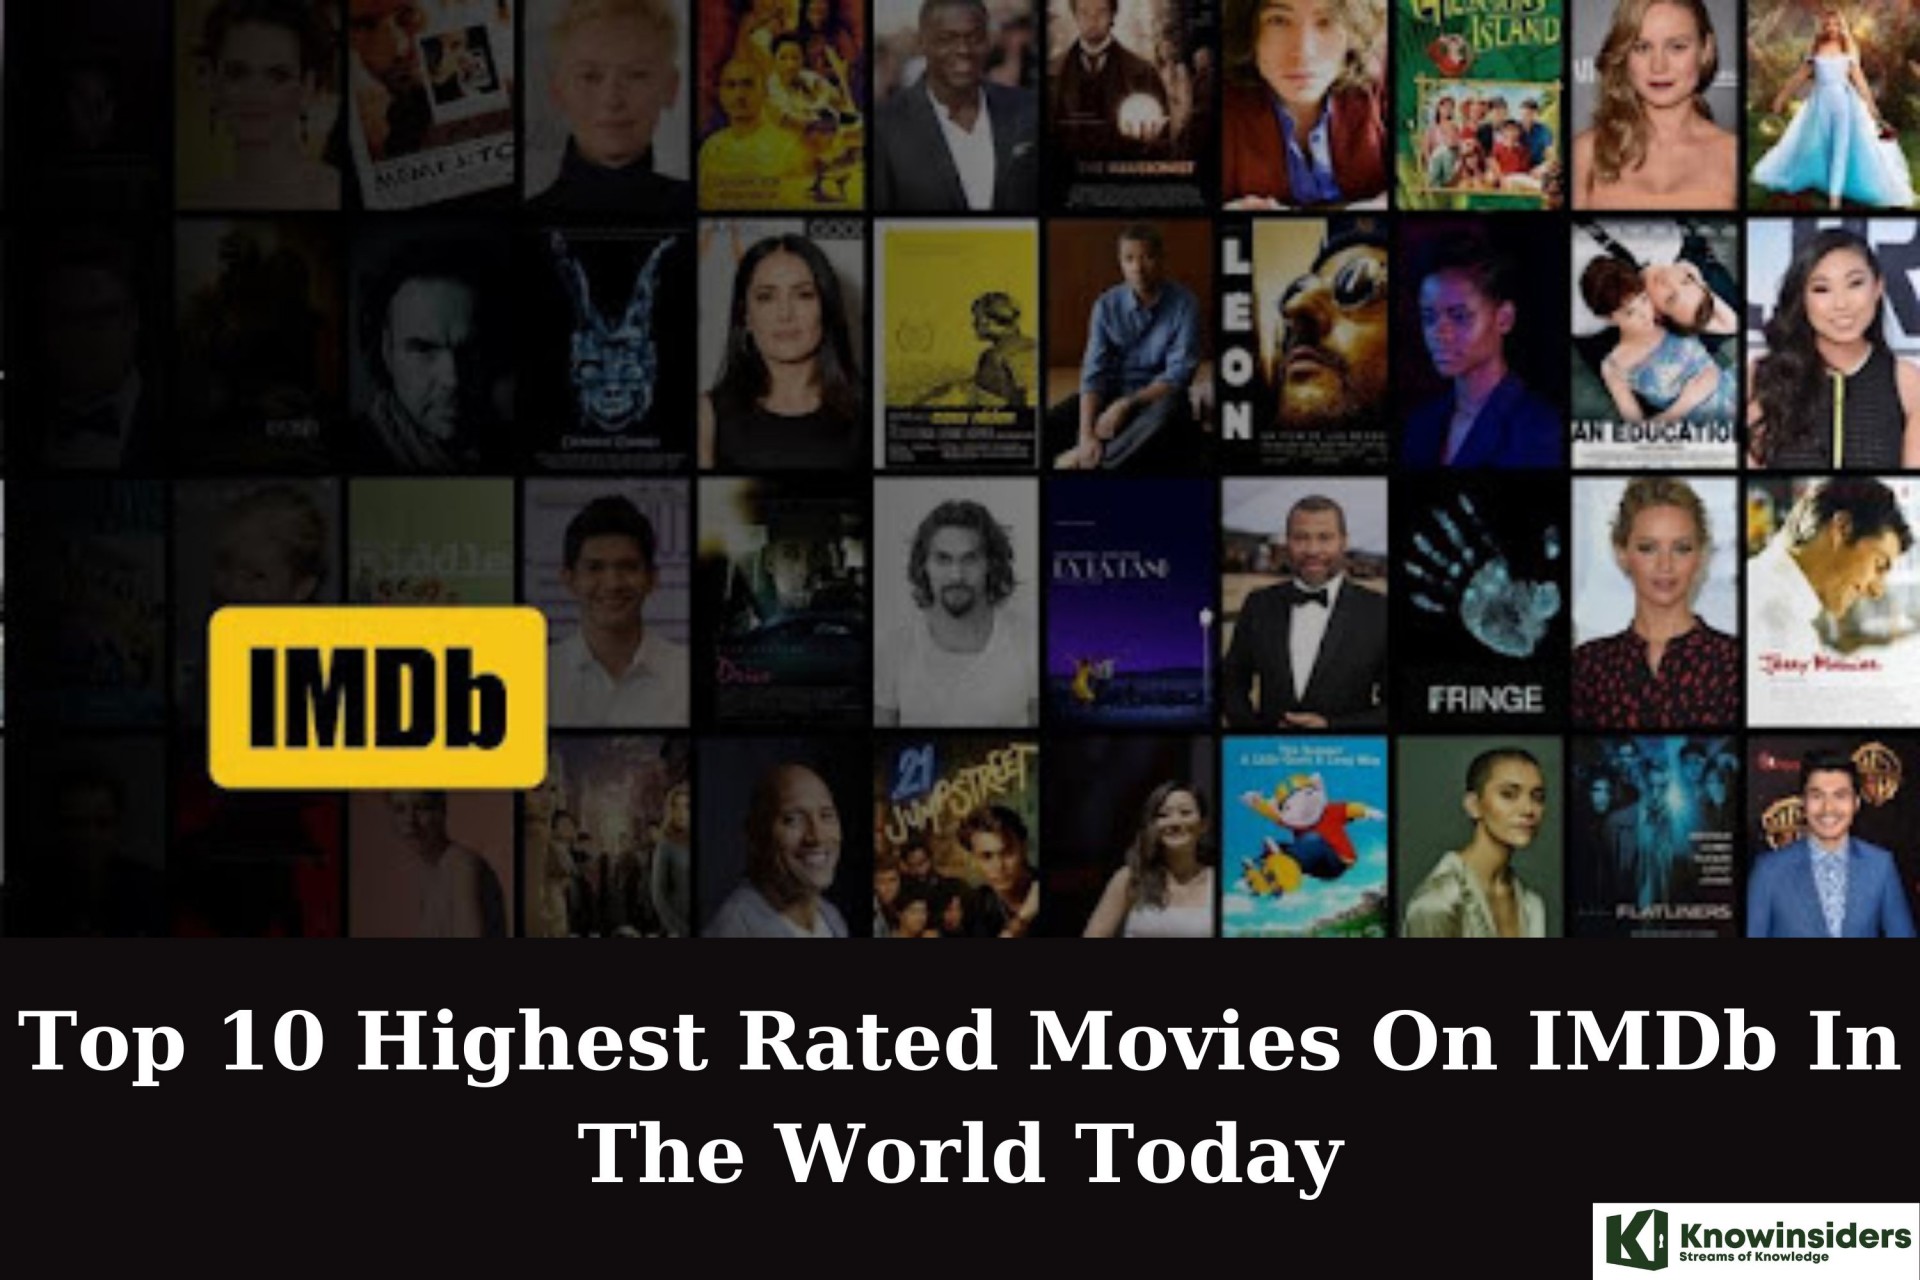 Top 10 Highest Rated Movies On IMDb In The World Today